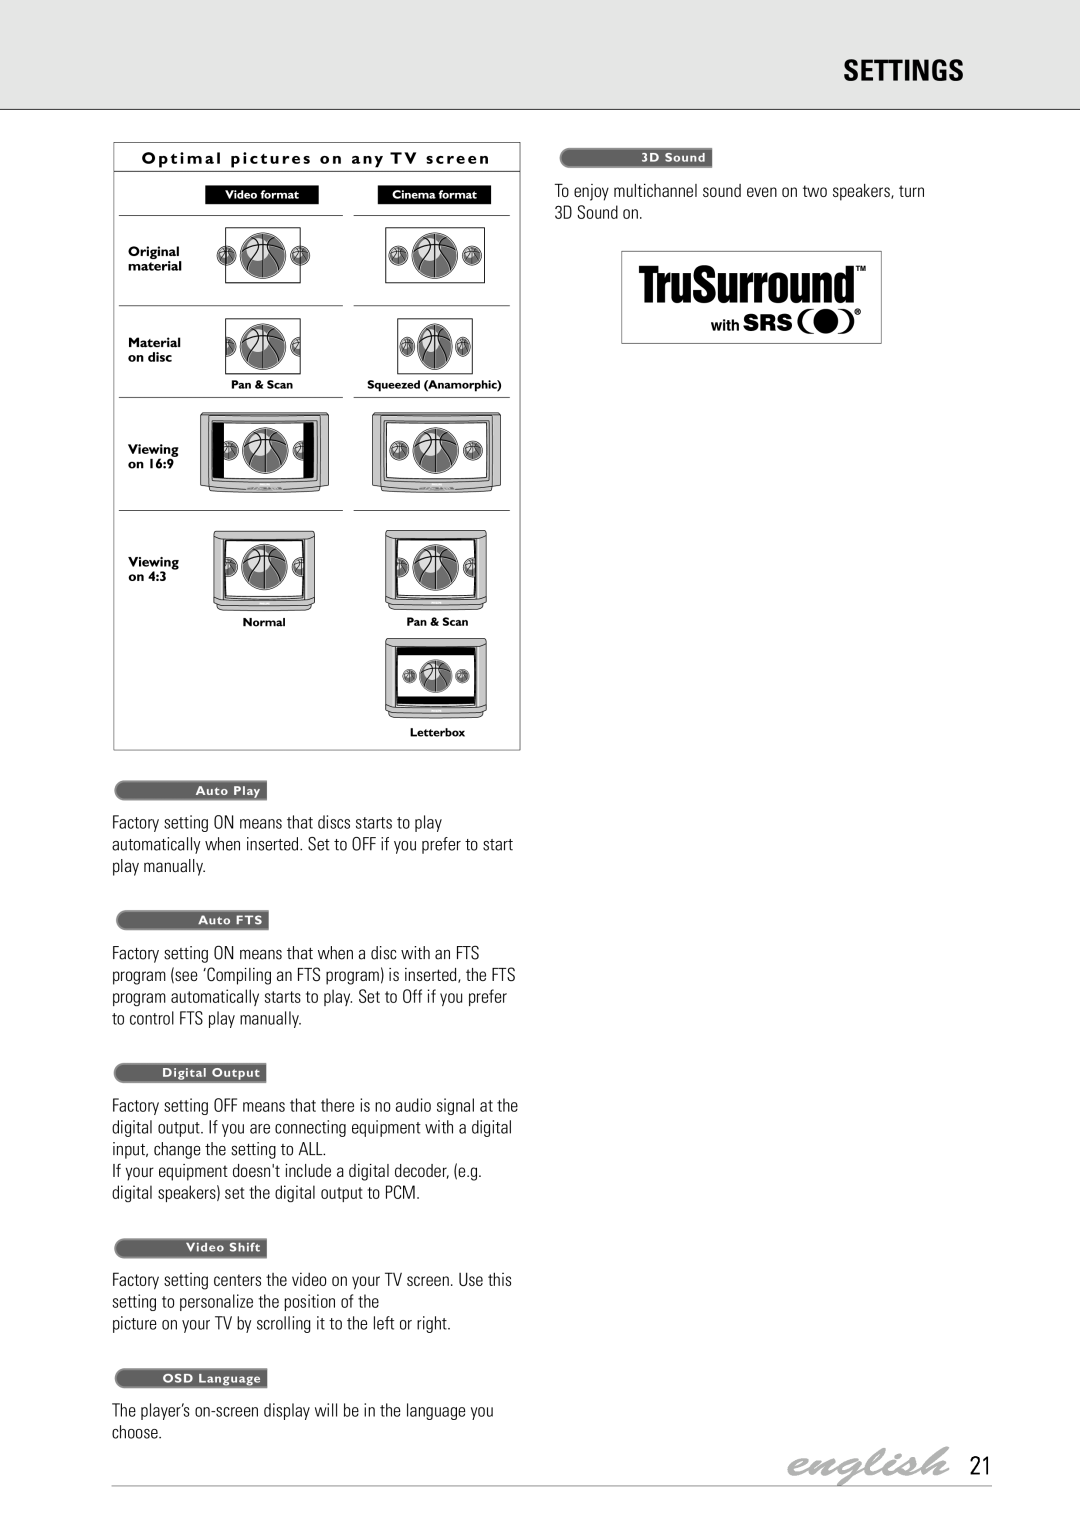 Dolby Laboratories DVD Video manual english, Settings, To enjoy multichannel sound even on two speakers, turn 3D Sound on 